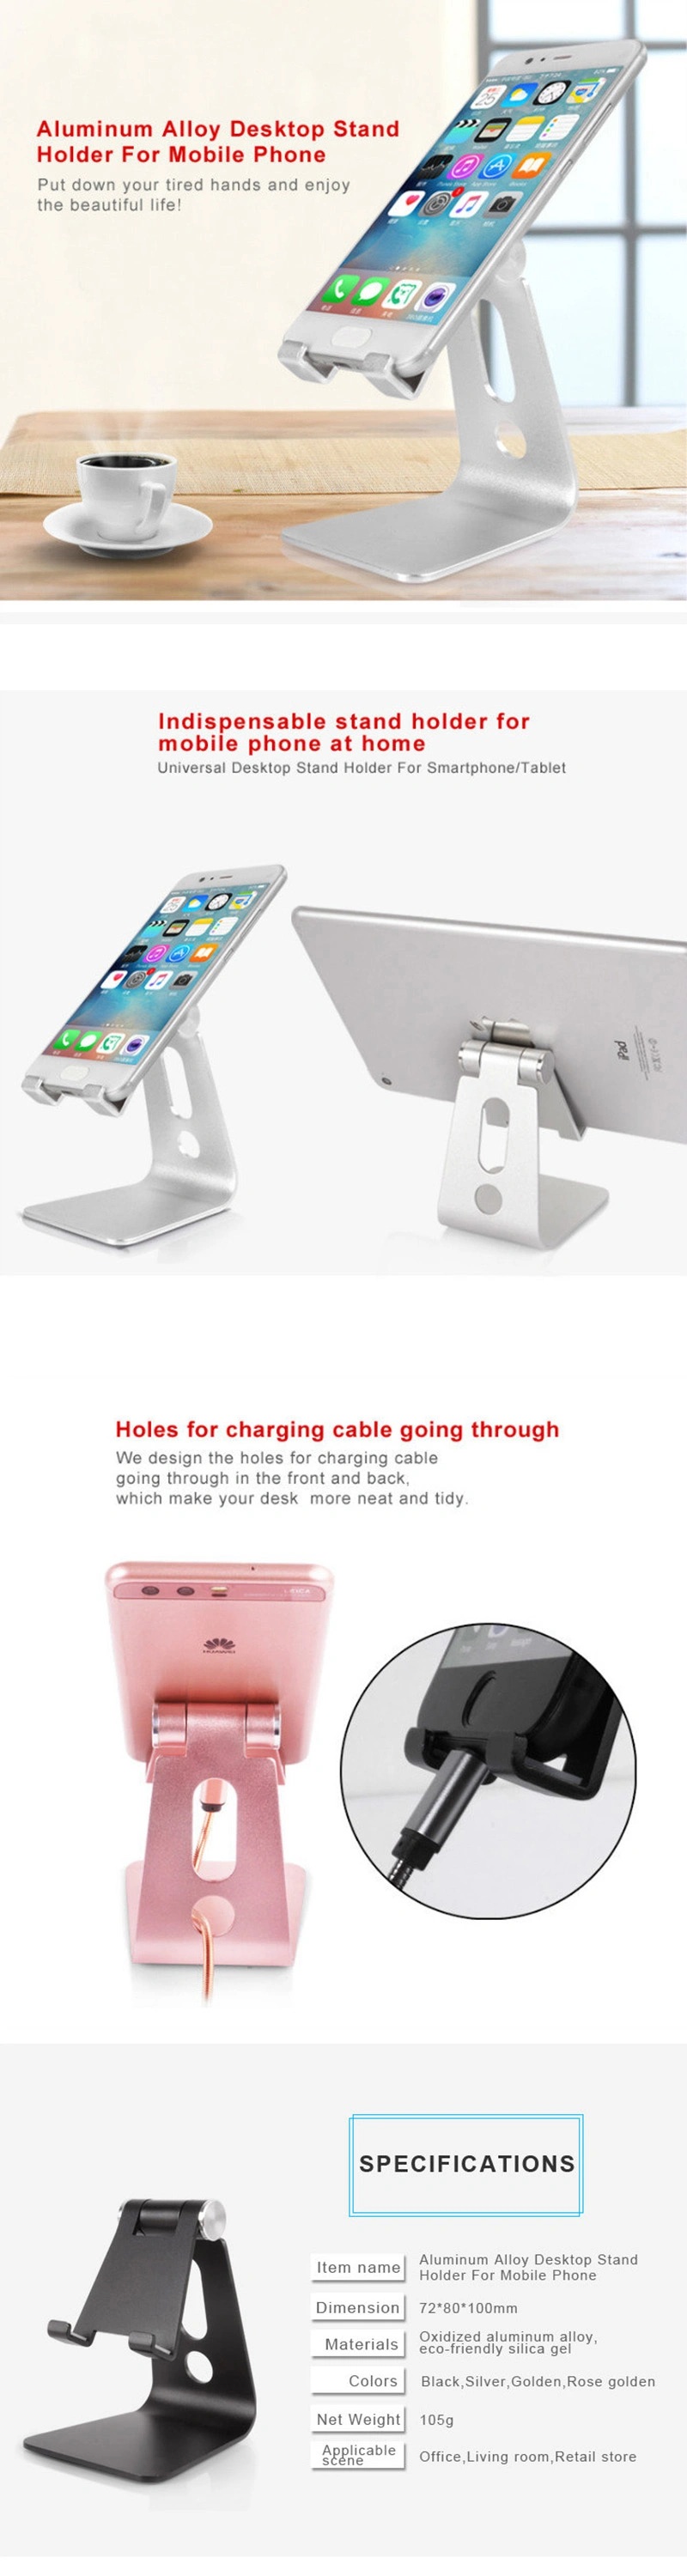 Foldable Aluminum Mobile Phone Stand Desktop Mount for iPhone, iPad